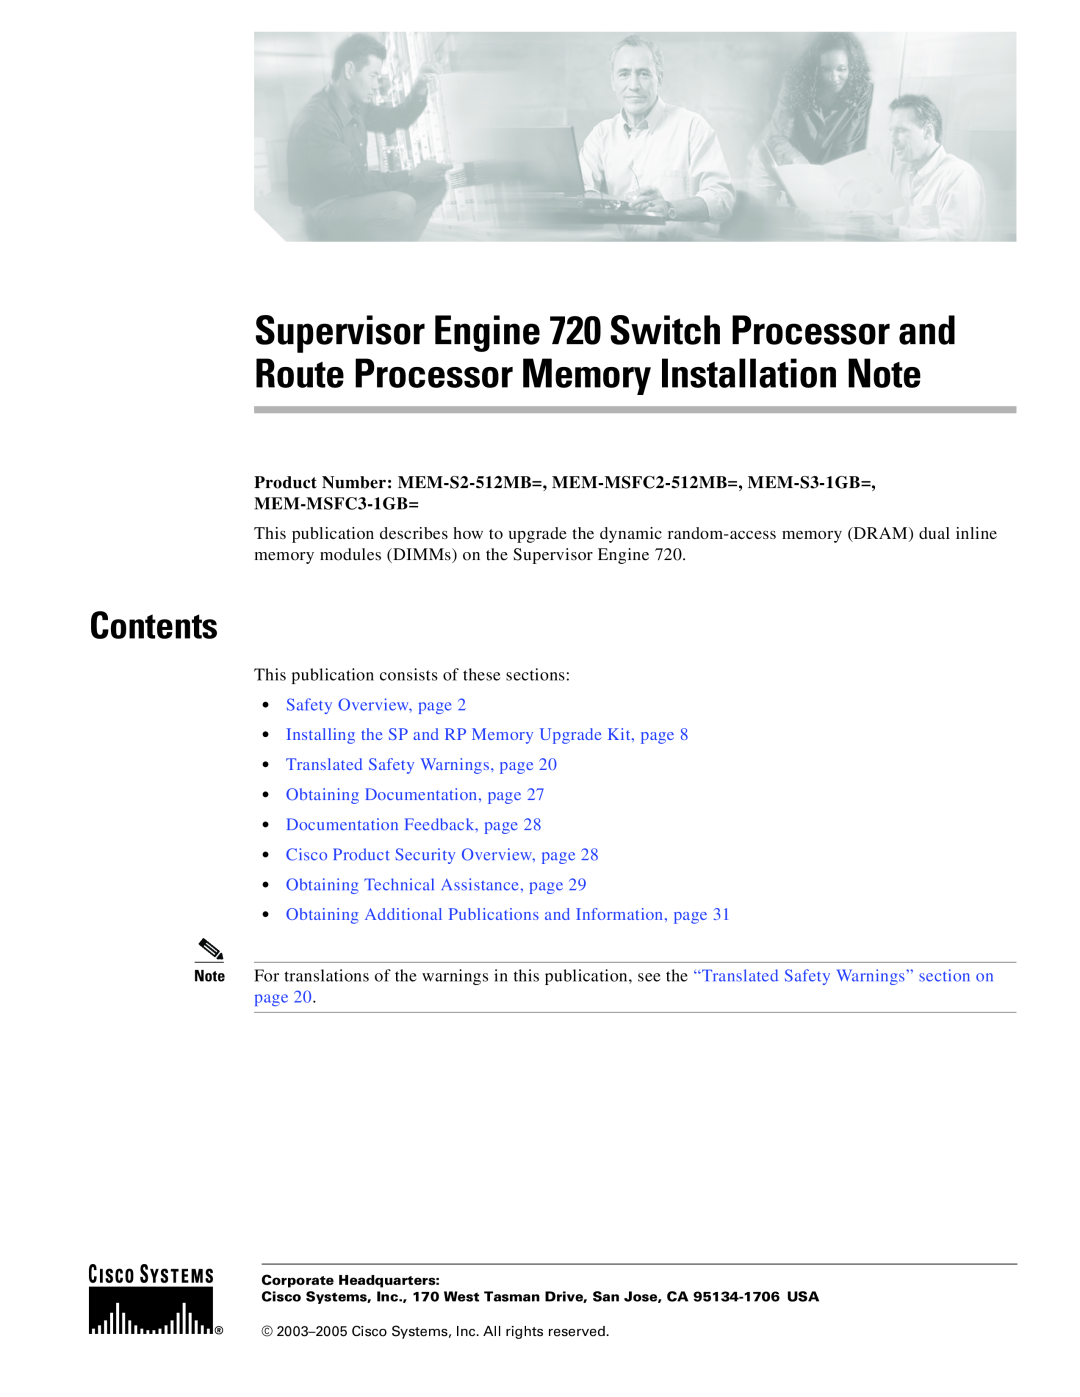 Cisco Systems manual Contents, Product Number MEM-S2-512MB=, MEM-MSFC2-512MB=, MEM-S3-1GB=, MEM-MSFC3-1GB= 